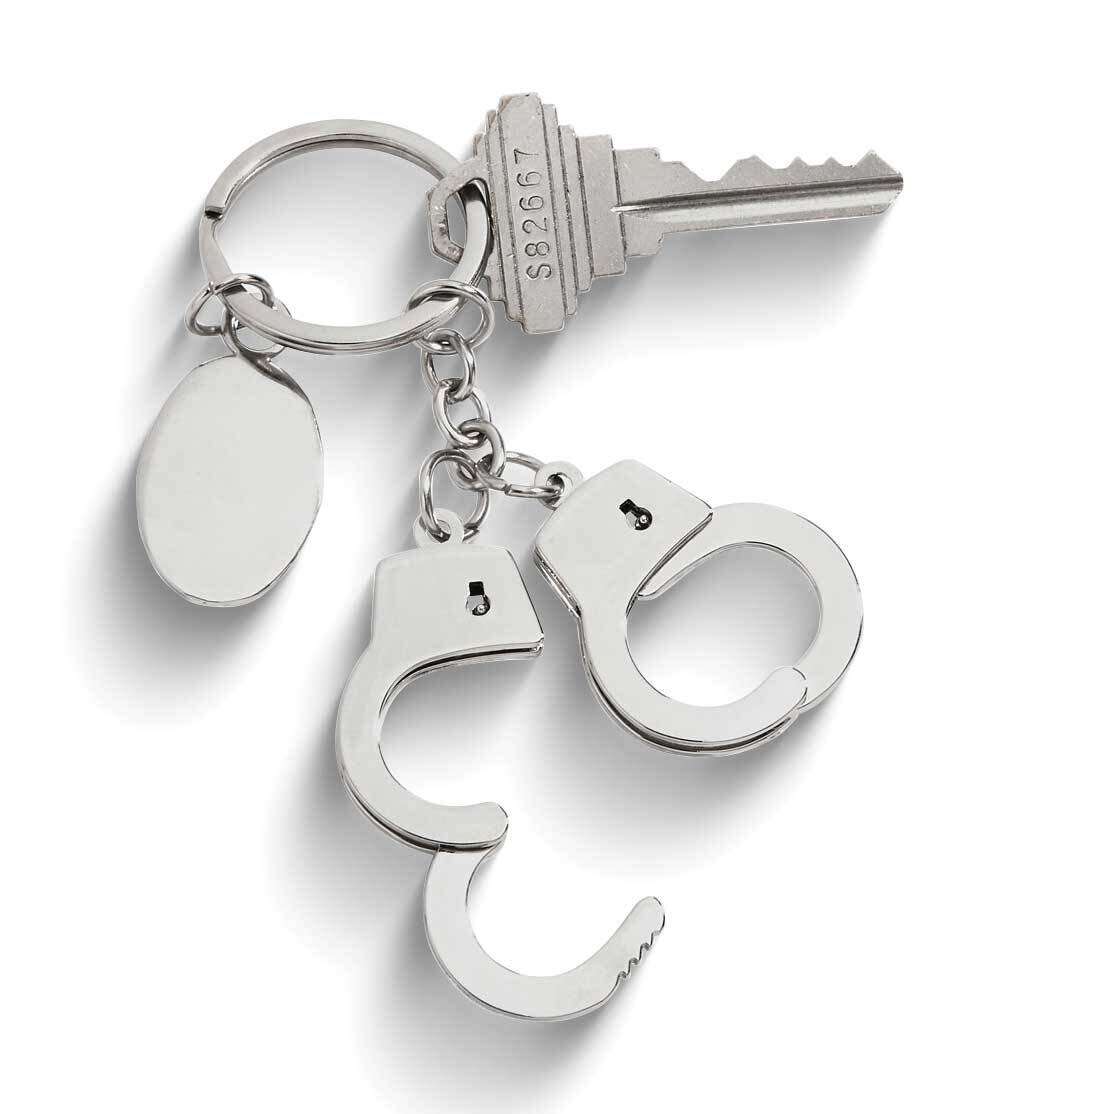 Nickle-plated Handcuffs Key Ring GM23981